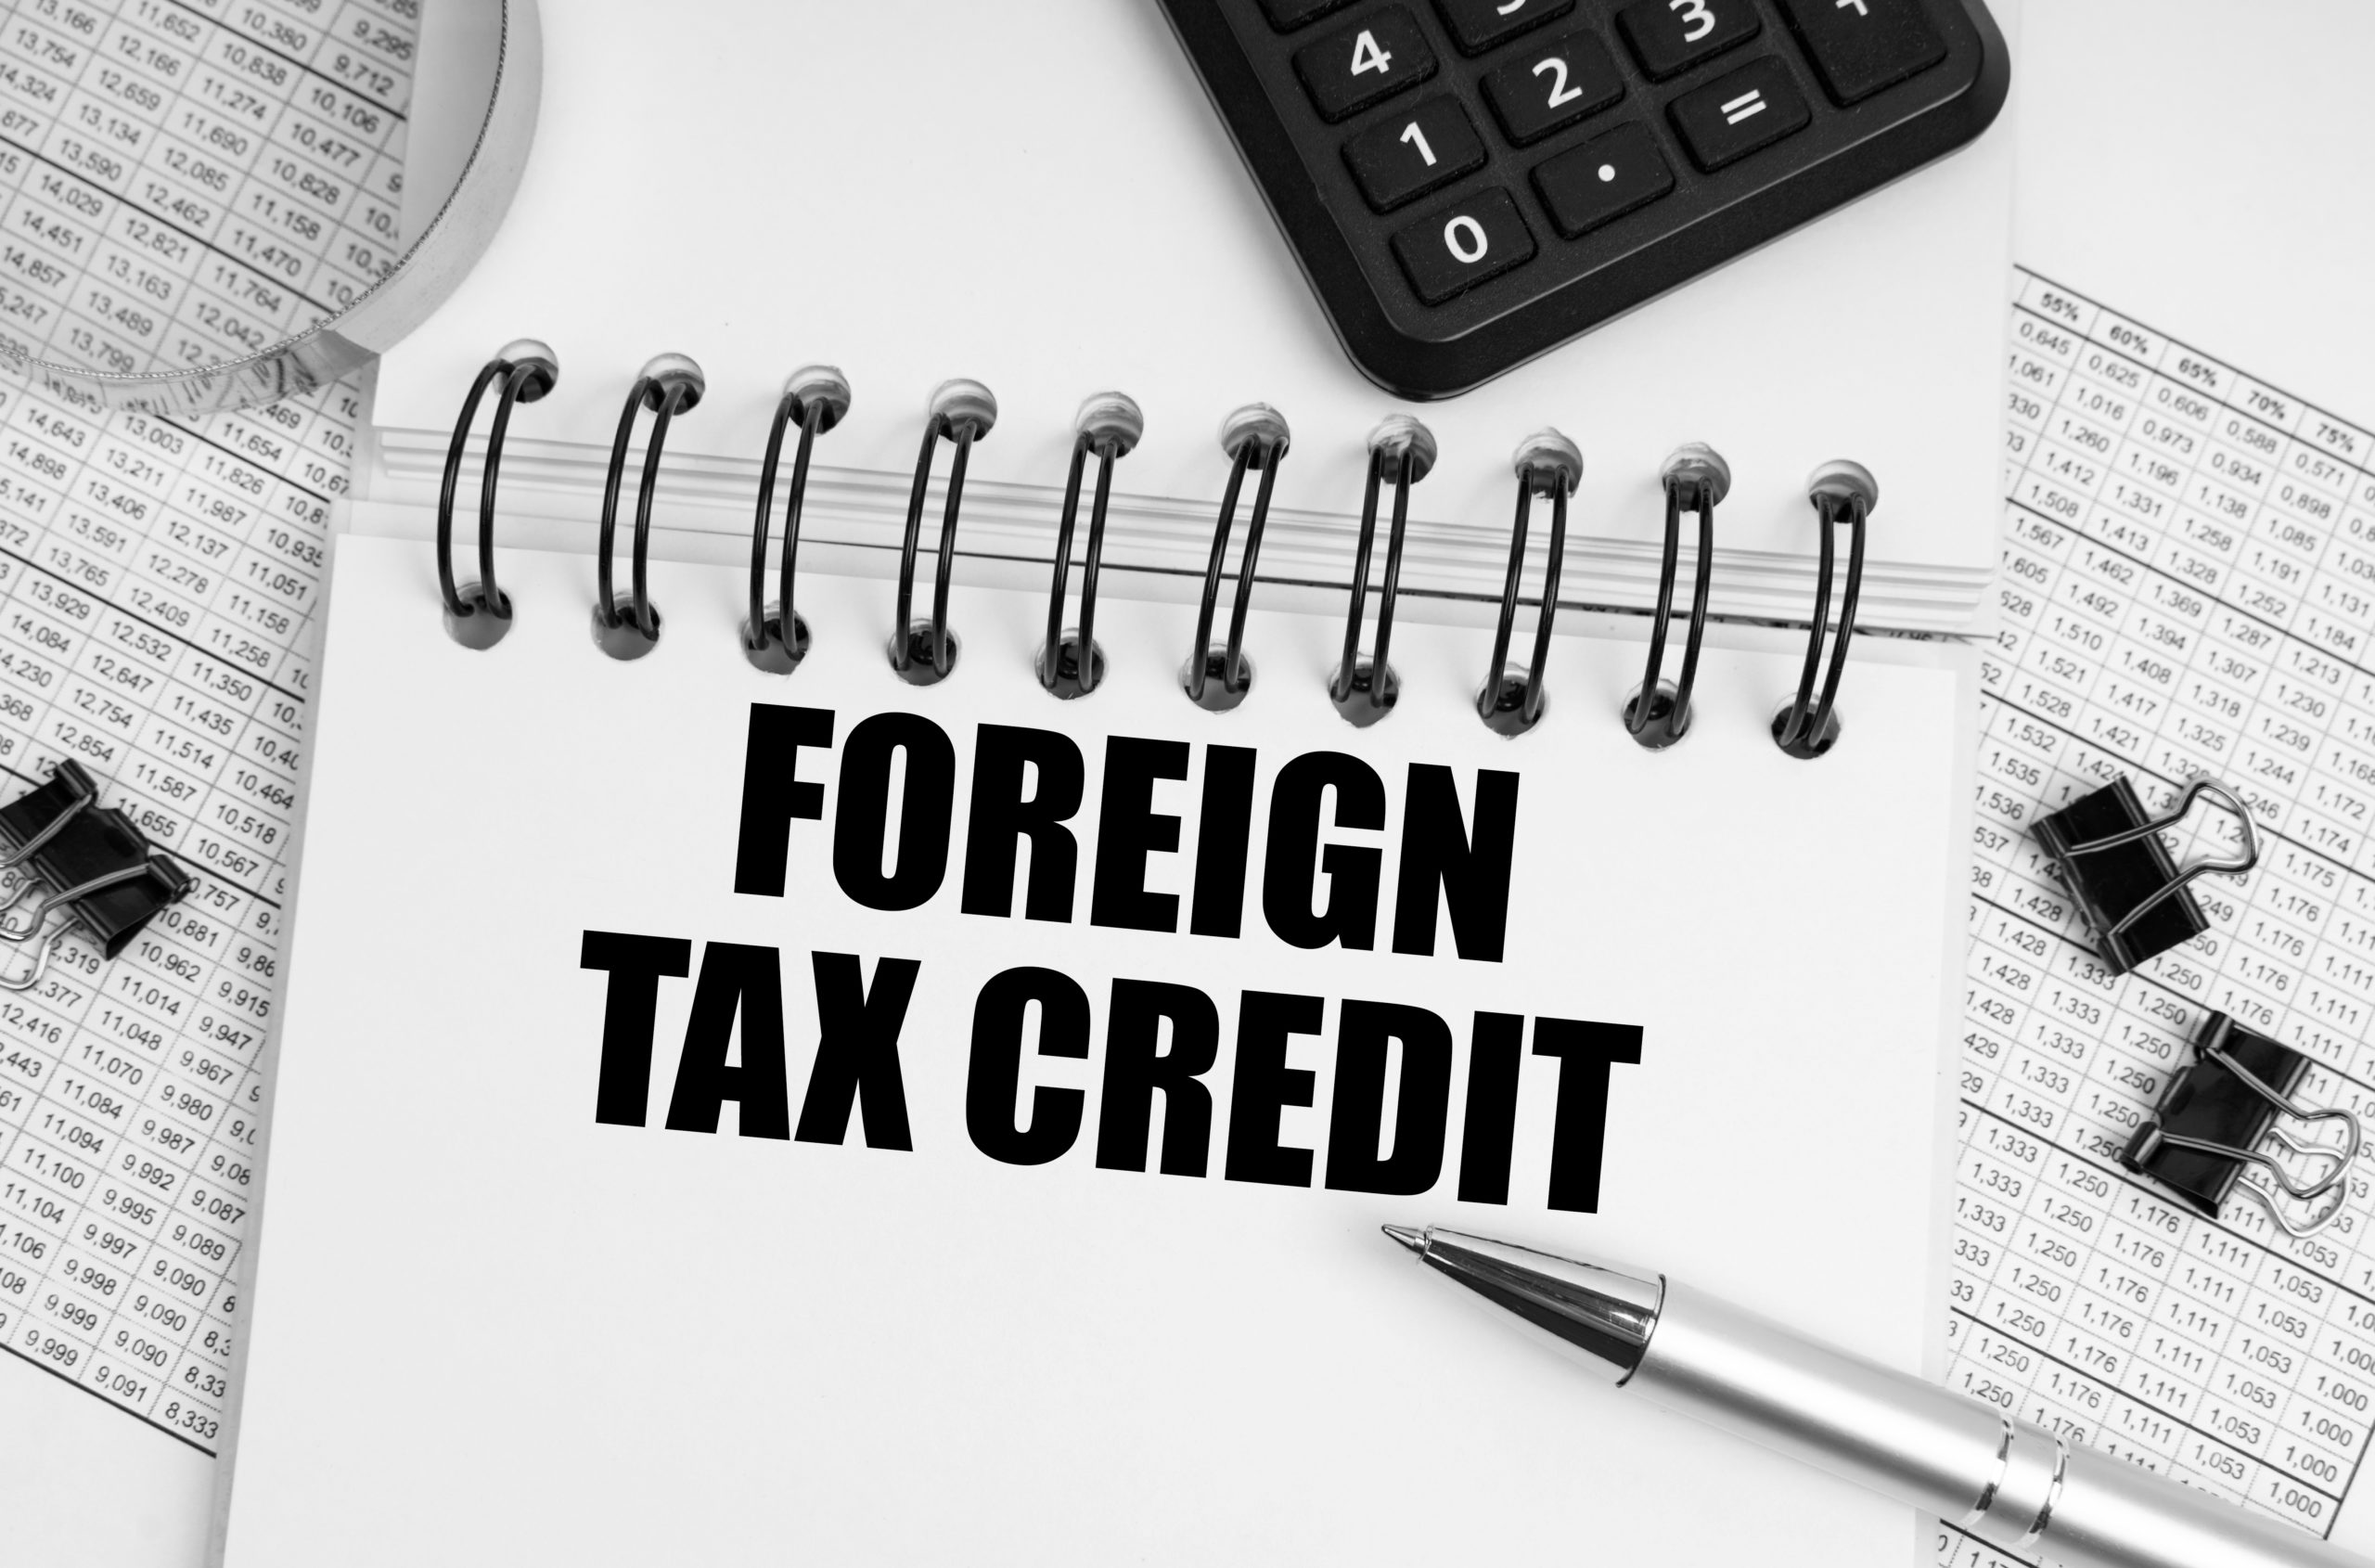 The Foreign Tax Credit International Tax Treaties & Compliance